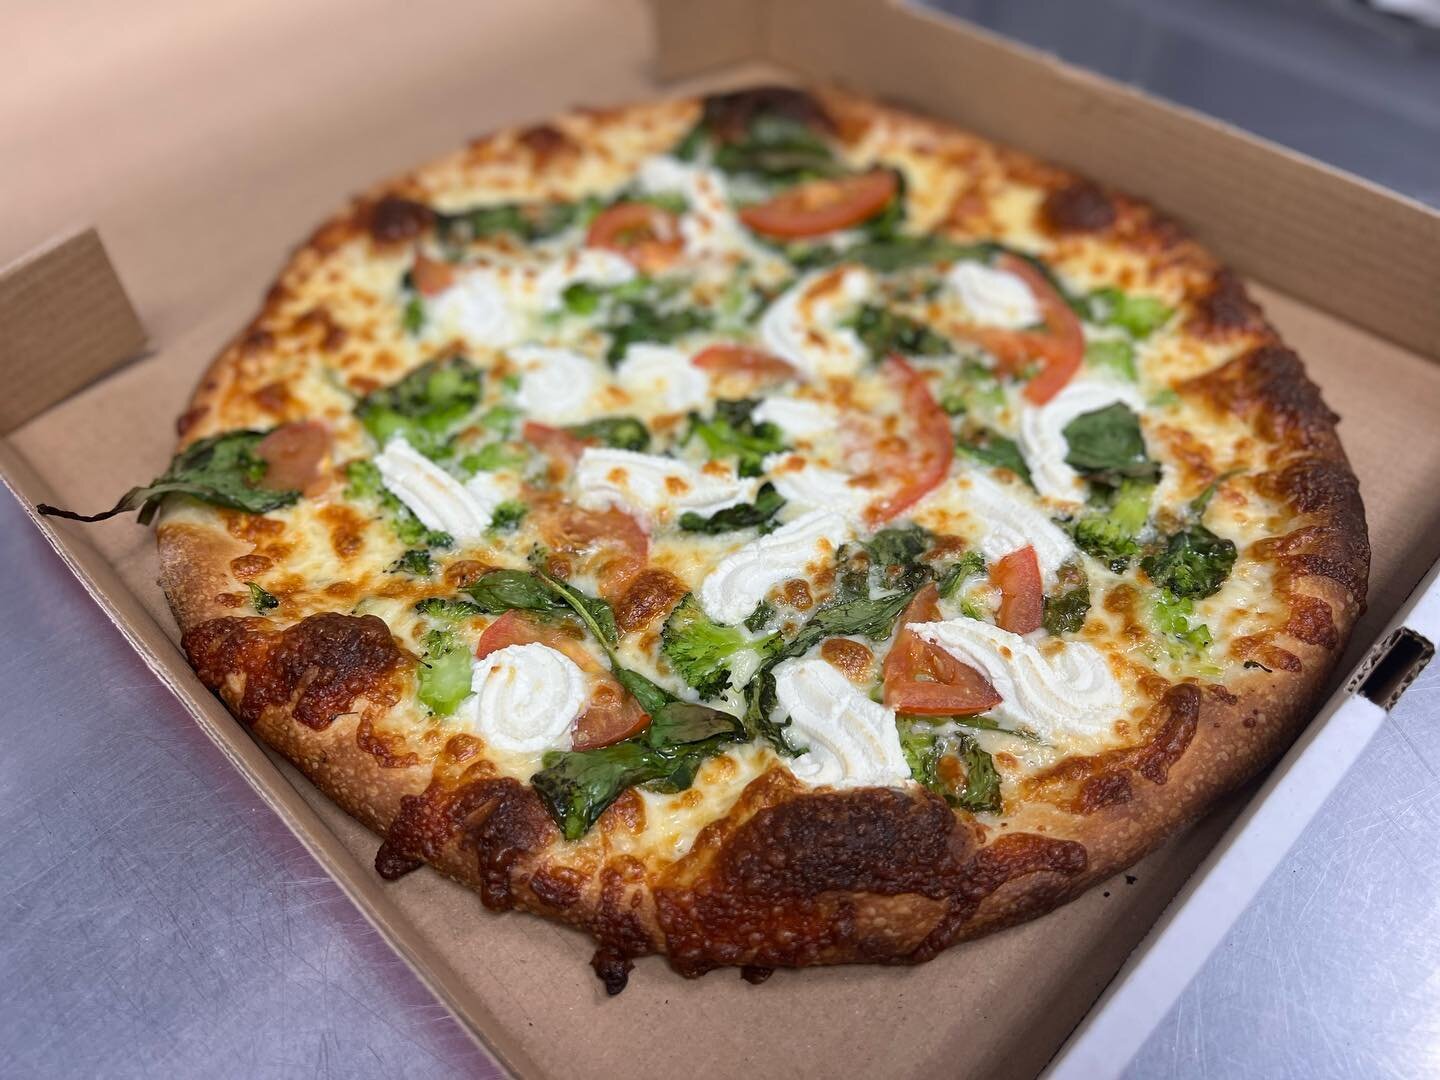 Di Napoli pizza made with olive oil and fresh garlic with broccoli, spinach , tomato and ricotta cheese garlic 🧄 🧀 🍅 🌿 🥦#phillypizza #phillyfoodforeal #phillyfoodblogger #philadelphiafood #openinphl #phillyfood #bestpizzaphilly #sesamecrustpizza